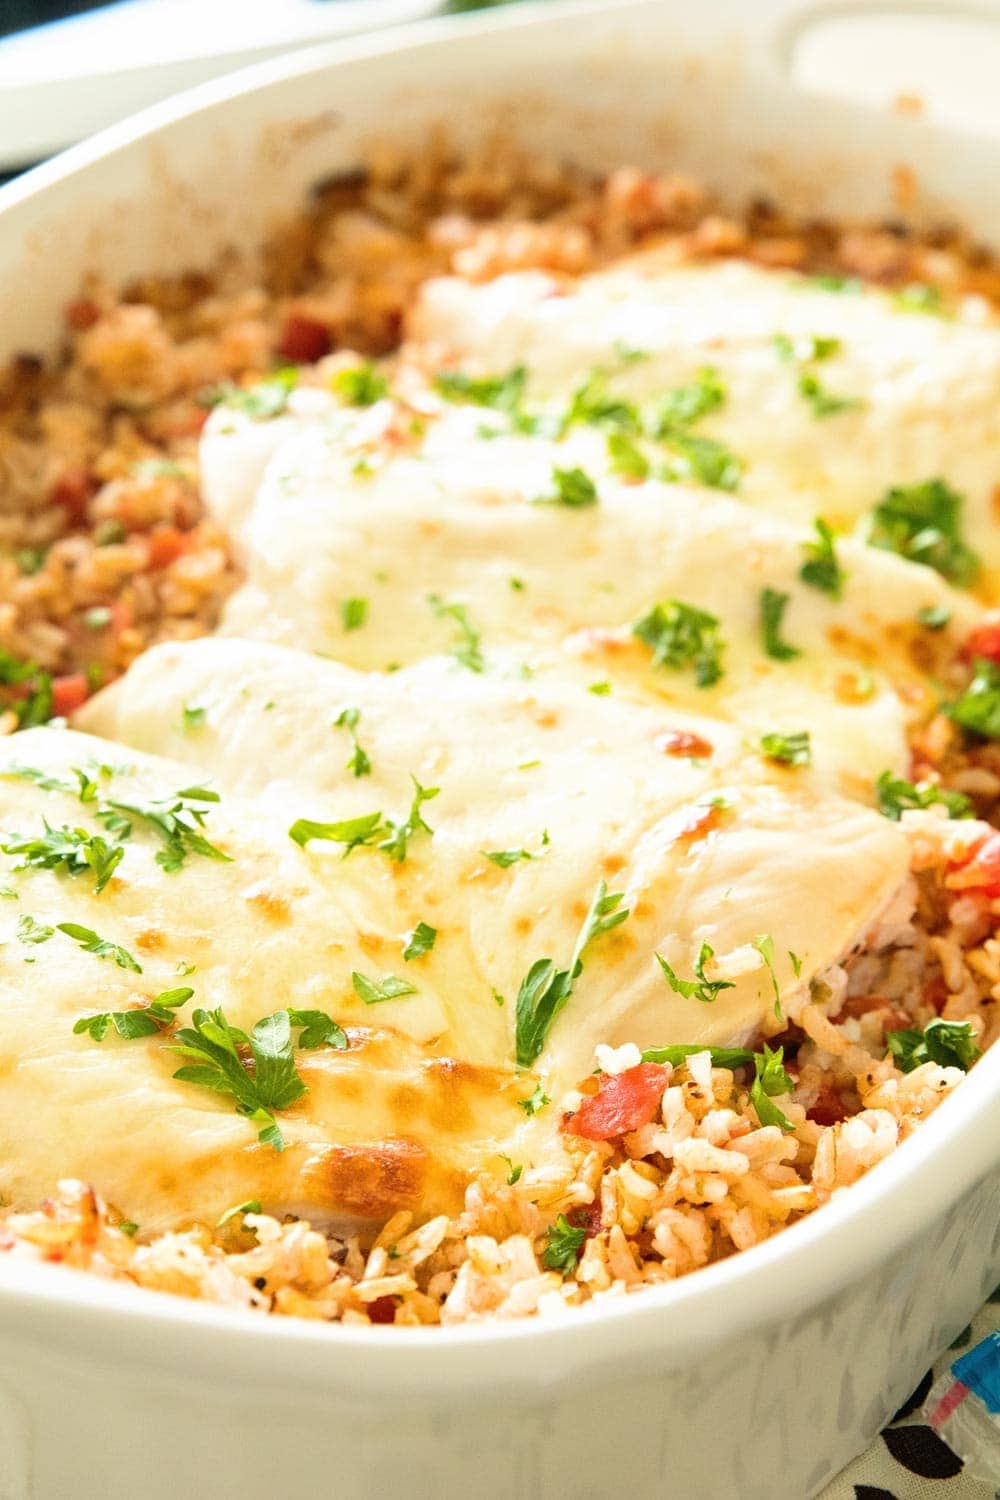 Italian Cheesy Chicken and Rice Casserole Recipe ~ The Ultimate One Dish Casserole That is Light & Healthy! Loaded with Italian Flavors, Chicken, Brown Rice, Cheese & Rice! Quick, Easy Dinner Recipe for the Entire Family!